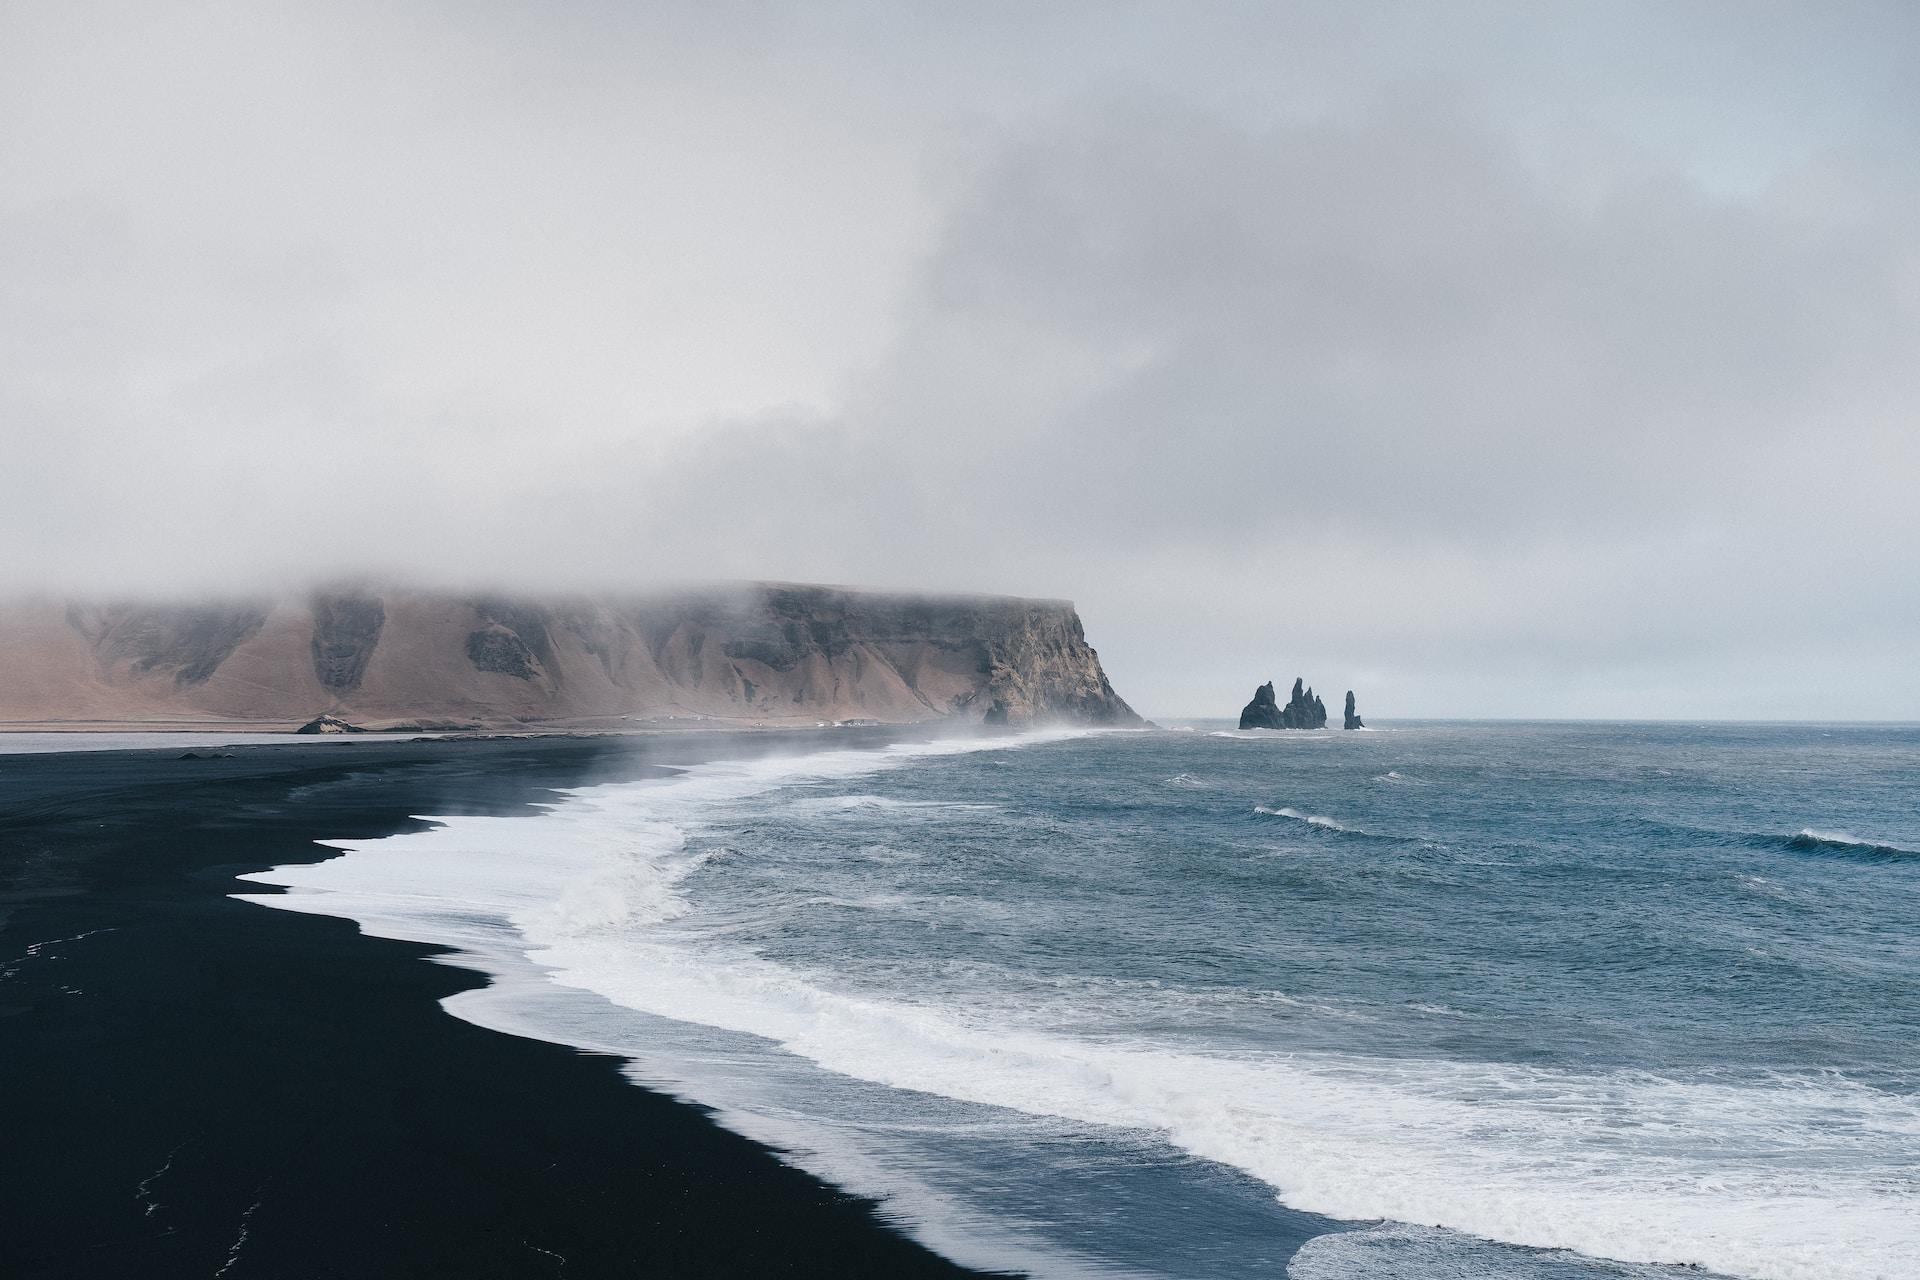 5 Golden Rules for Planning a Trip to Iceland